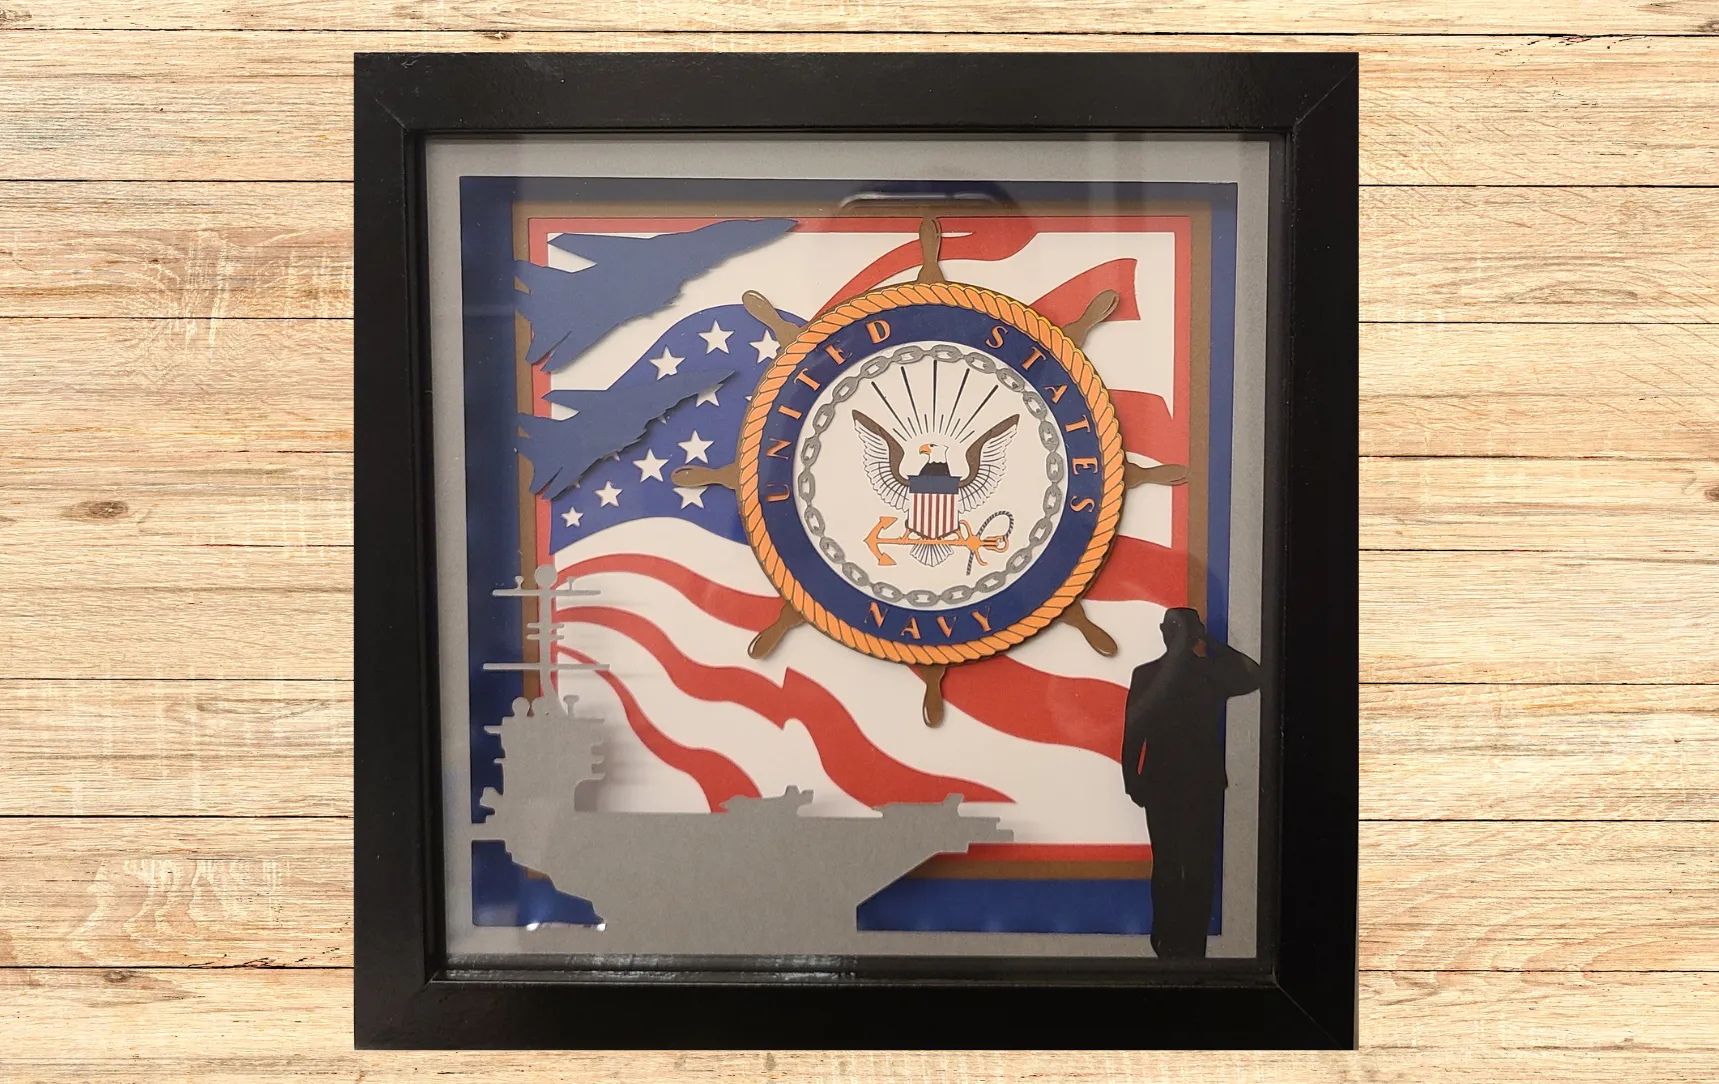 How To Make A Layered Navy Aircraft Carrier Shadow Box for Female Sailor (Tutorial Video!)